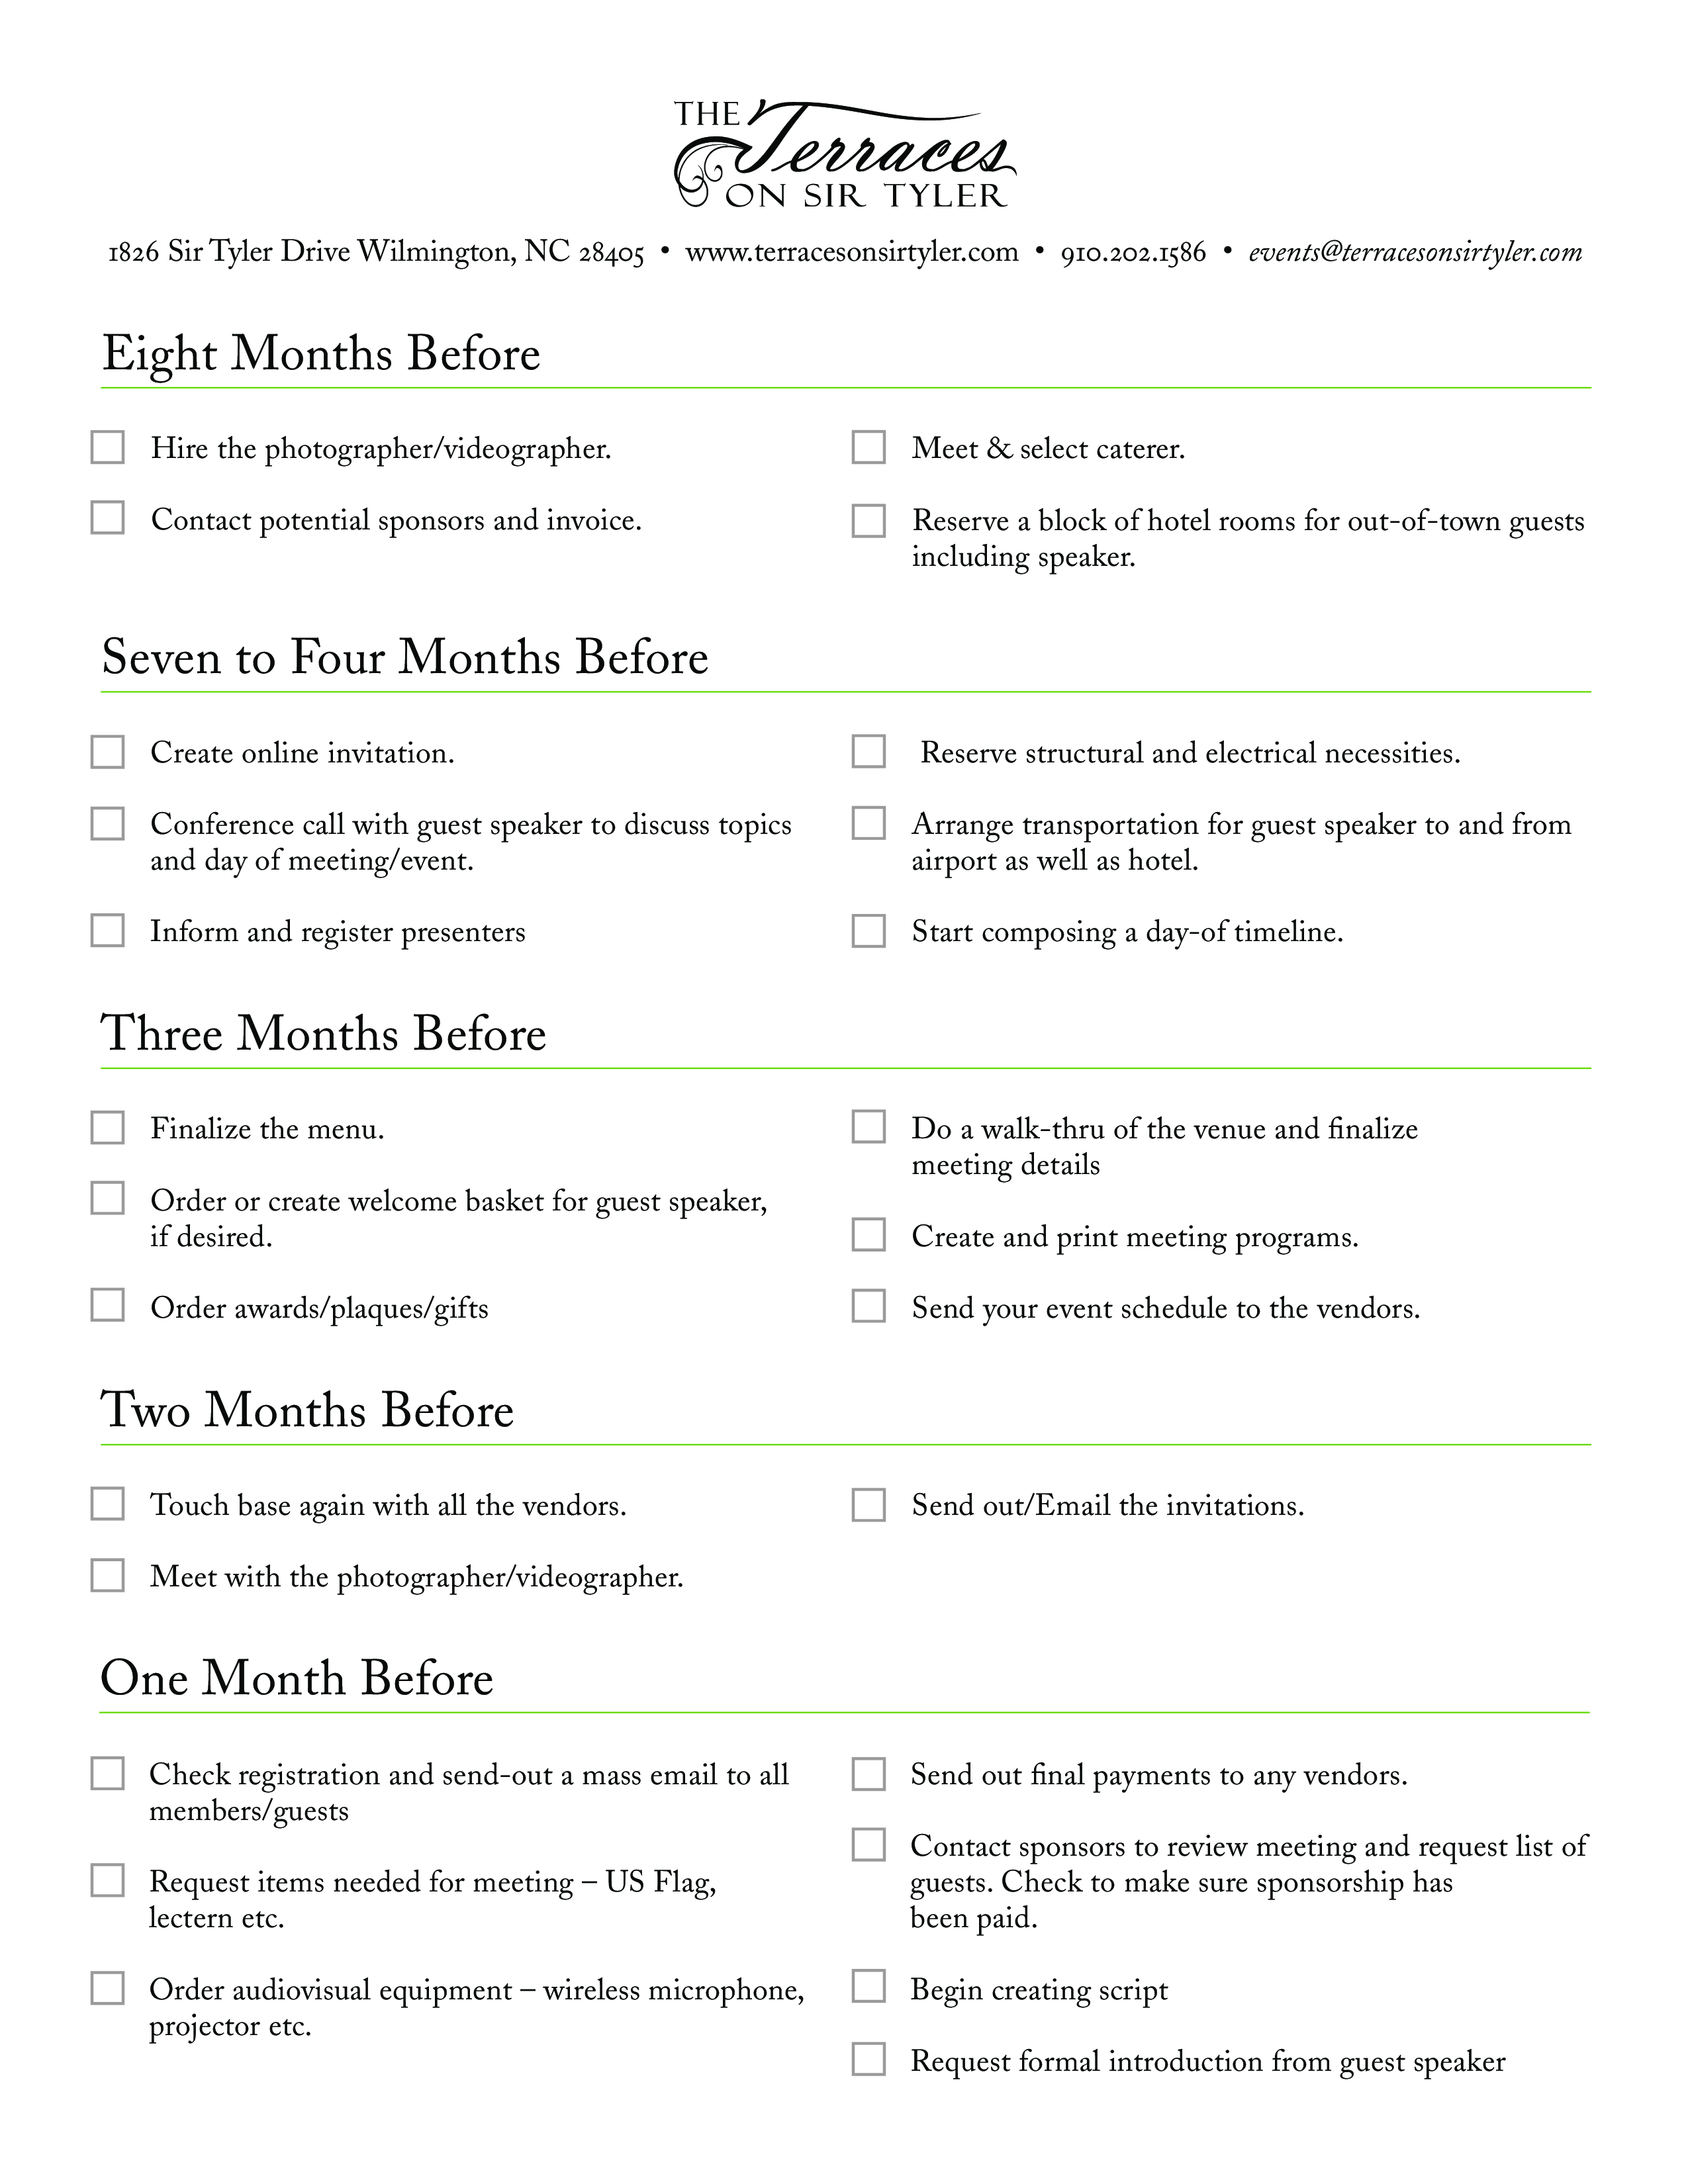 Corporate Event Planning Checklist main image